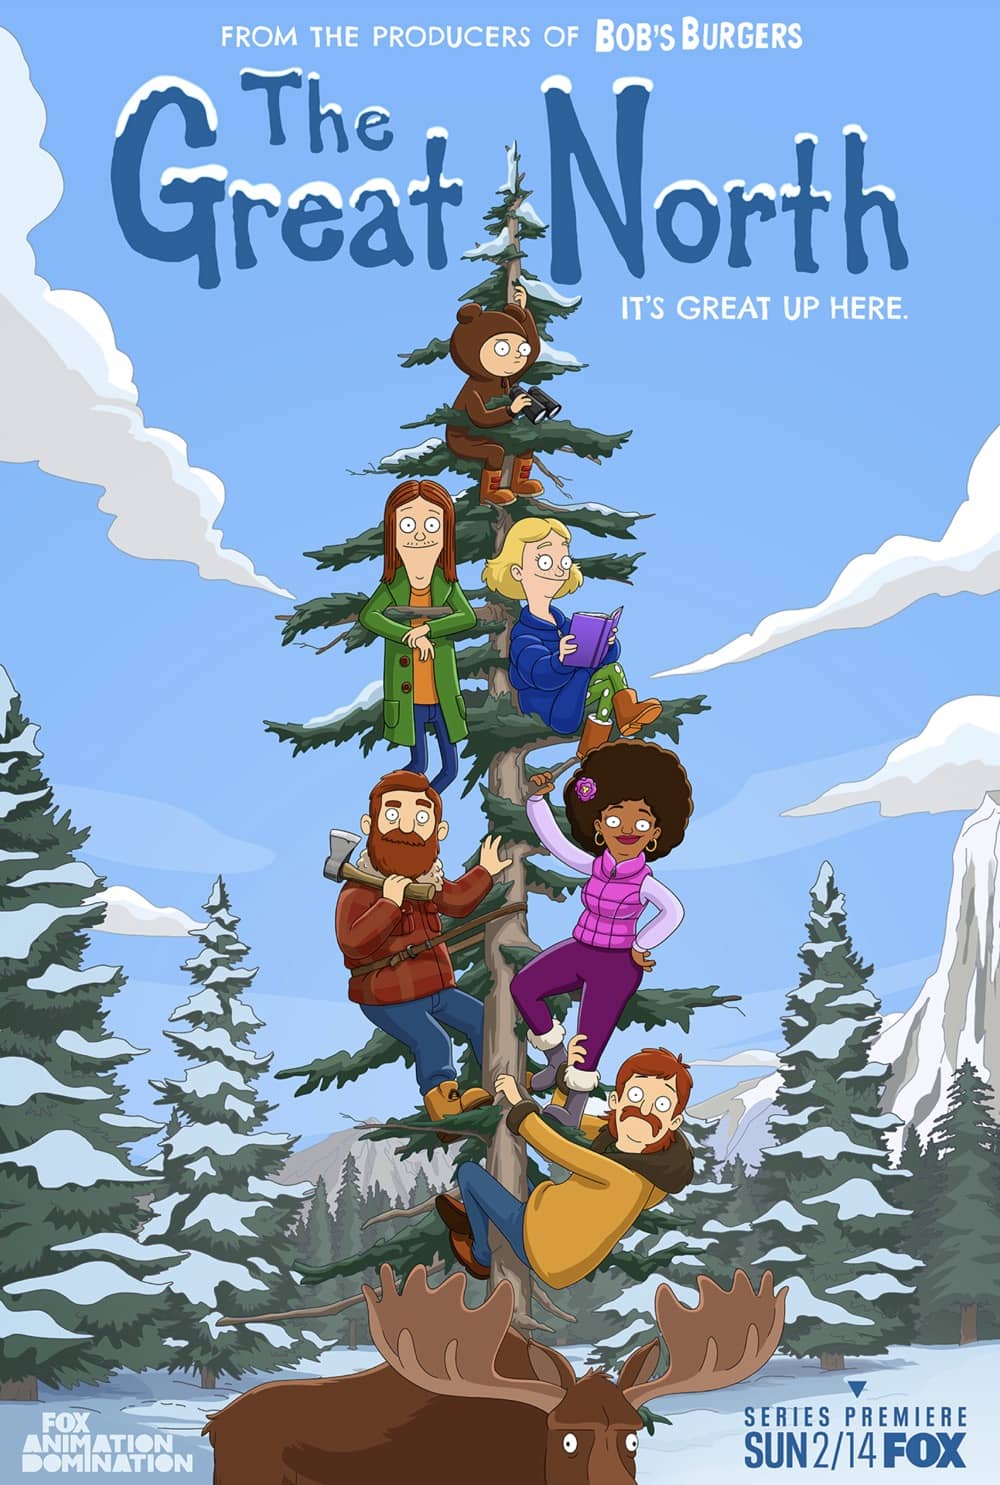 Point Classics track placed in animated sitcom ‘The Great North’